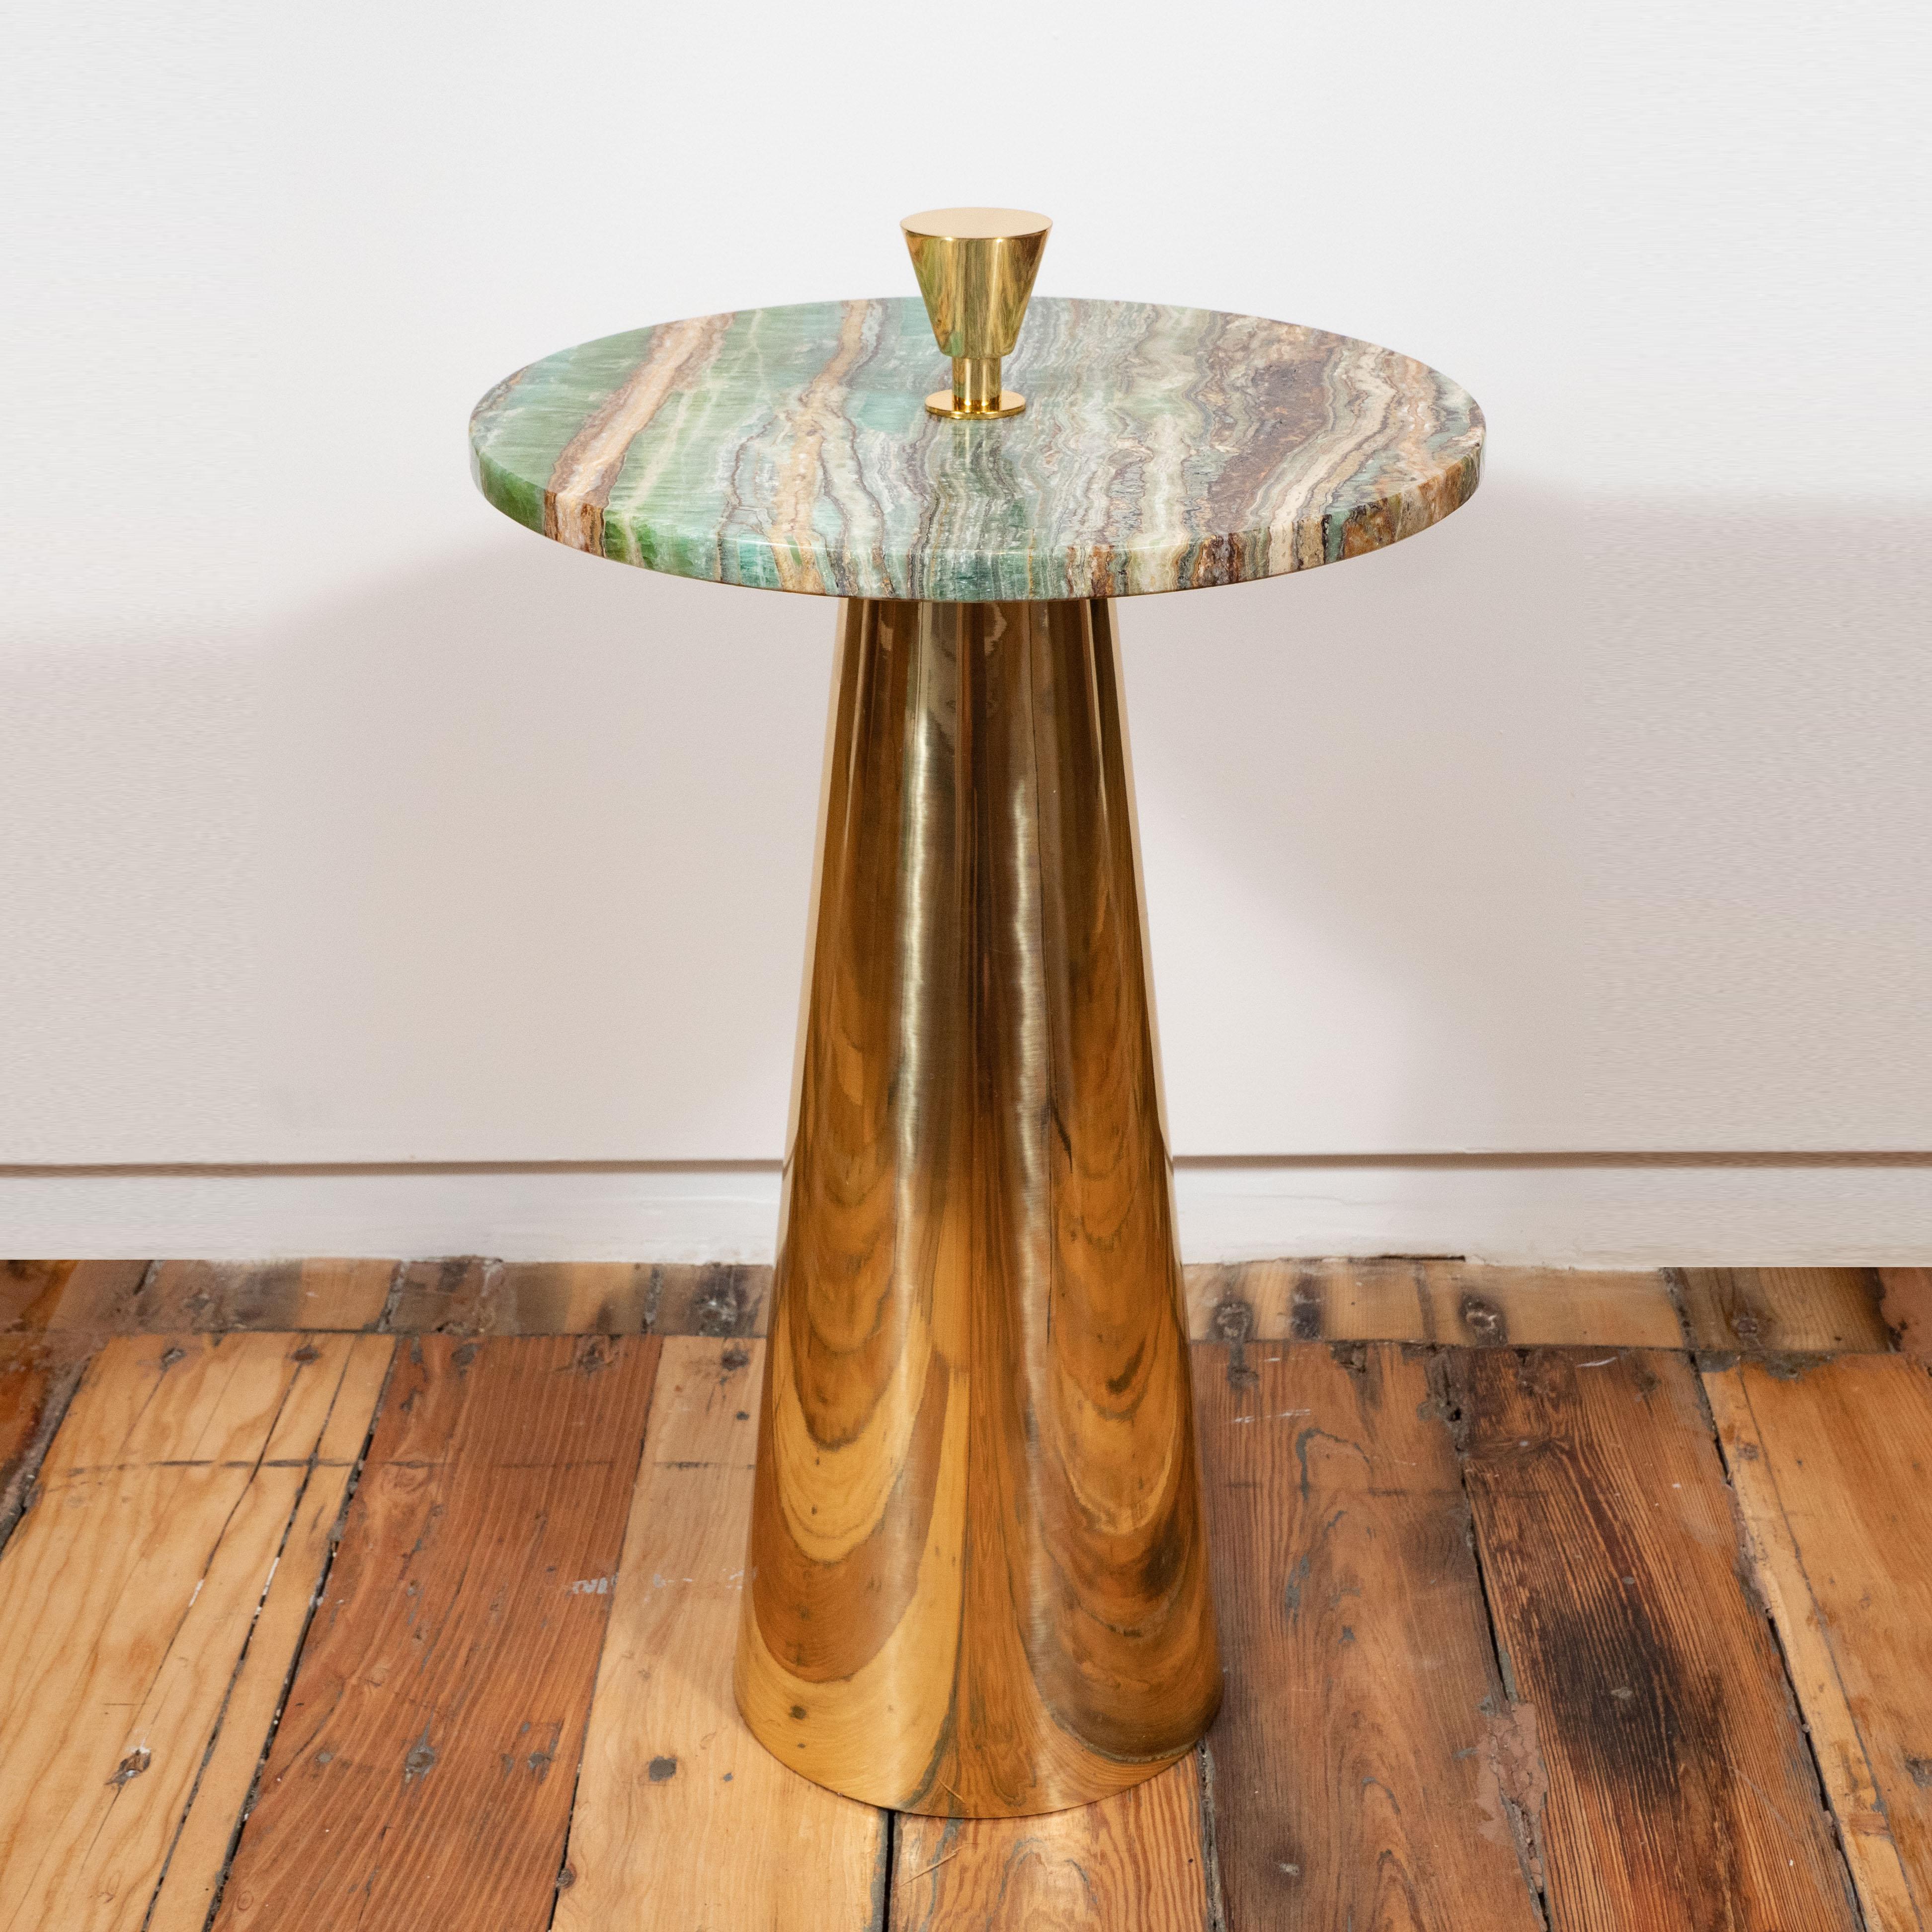 This pair of round emerald green onyx marble top and brass side or martini tables were designed and created in Milan, Italy. Polished emerald green onyx marble which includes ivory and taupe veins sits atop a conical polished brass base. A solid